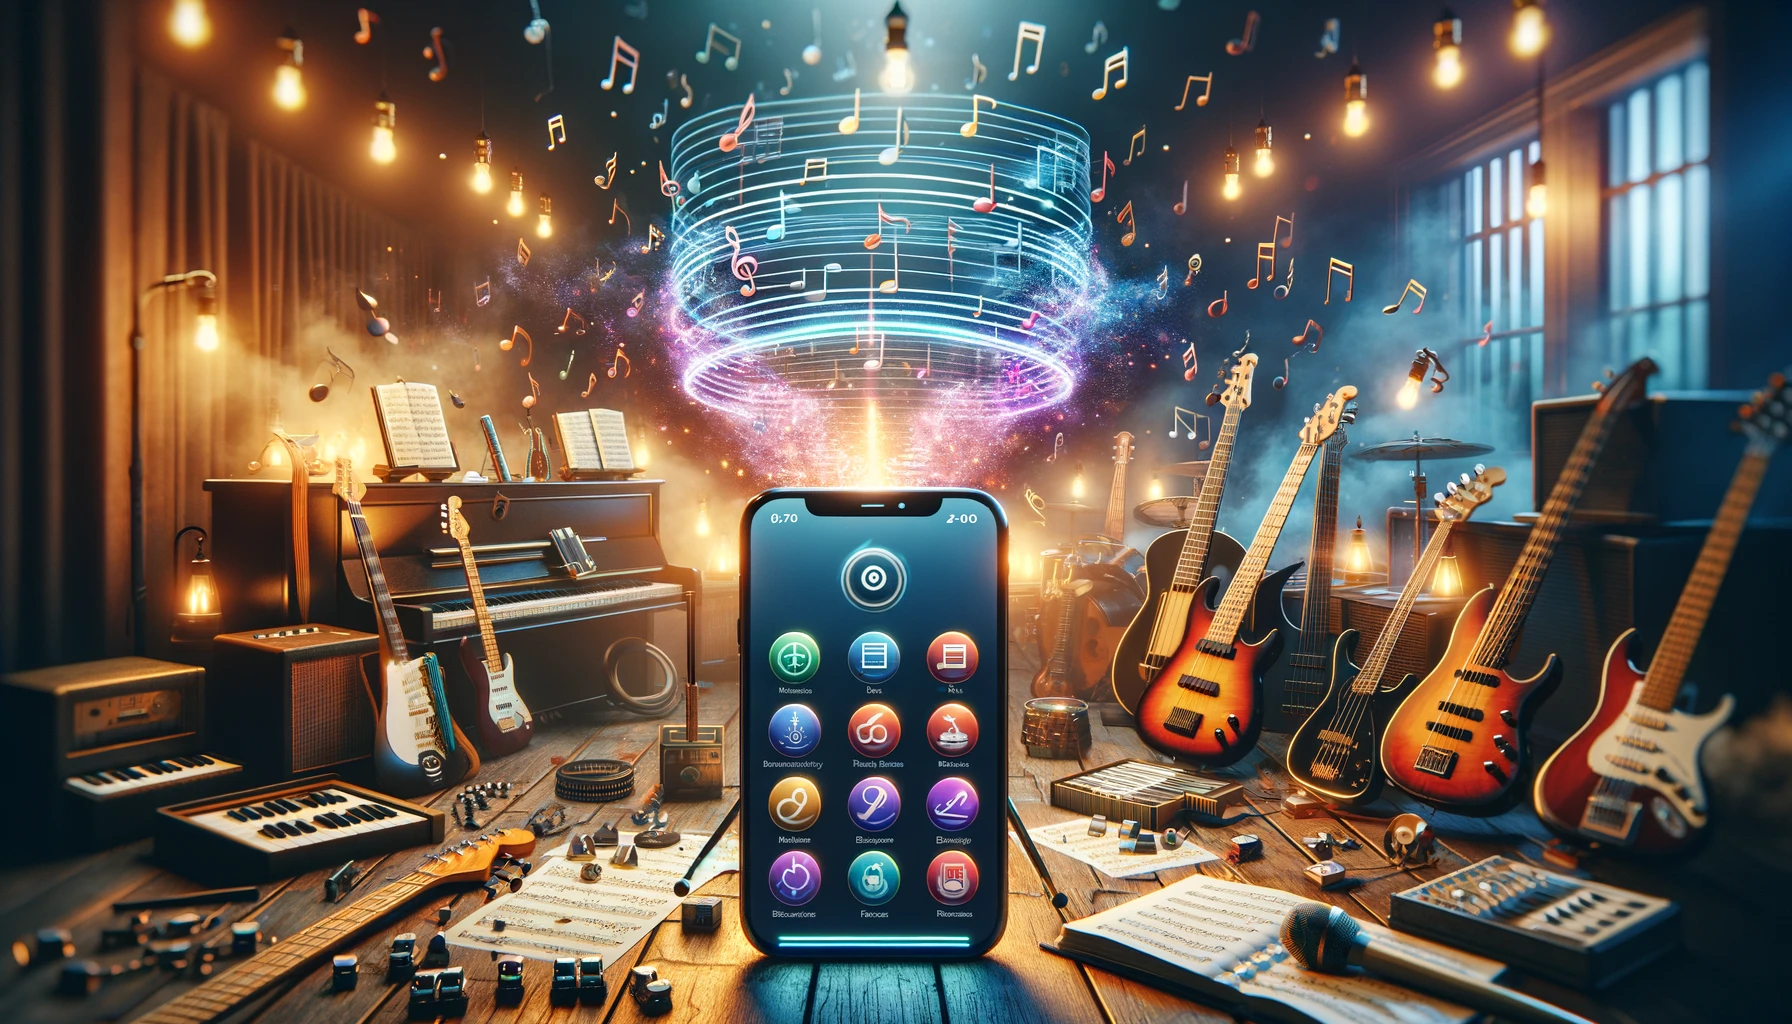 A smartphone with music app icons on screen, surrounded by various musical instruments and glowing musical notes.